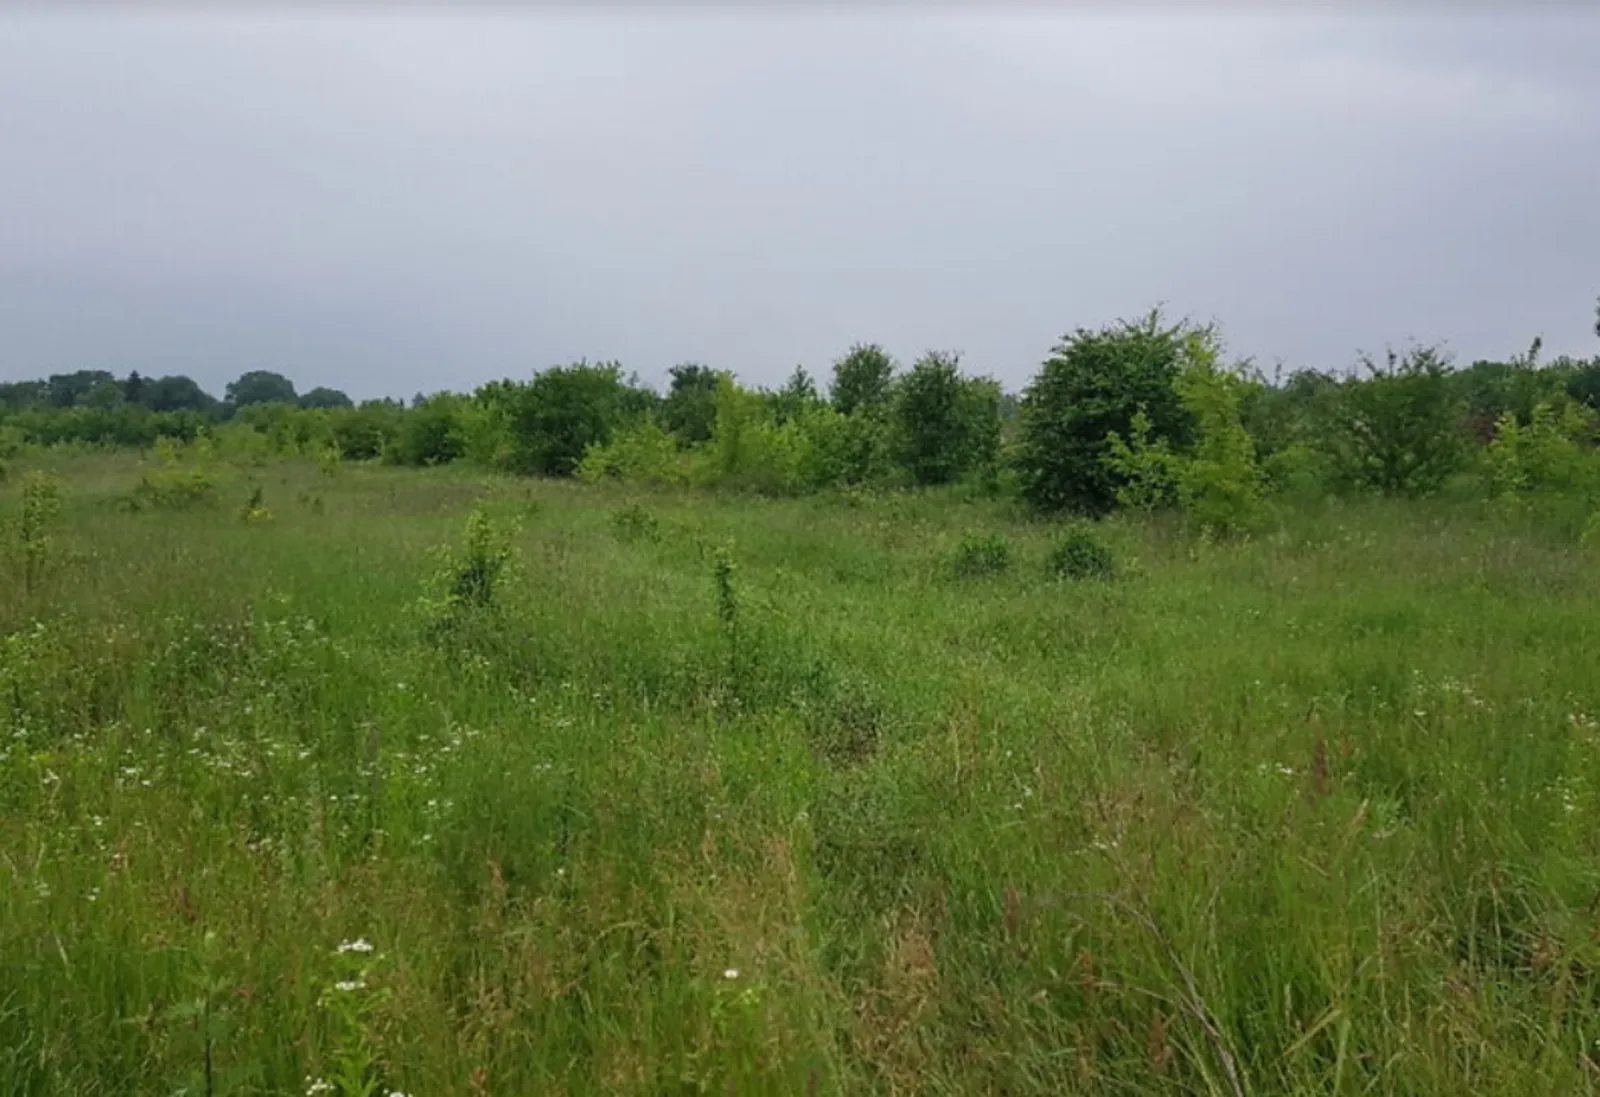 Land for sale for residential construction. Sakharnyy zavod, Ternopil. 